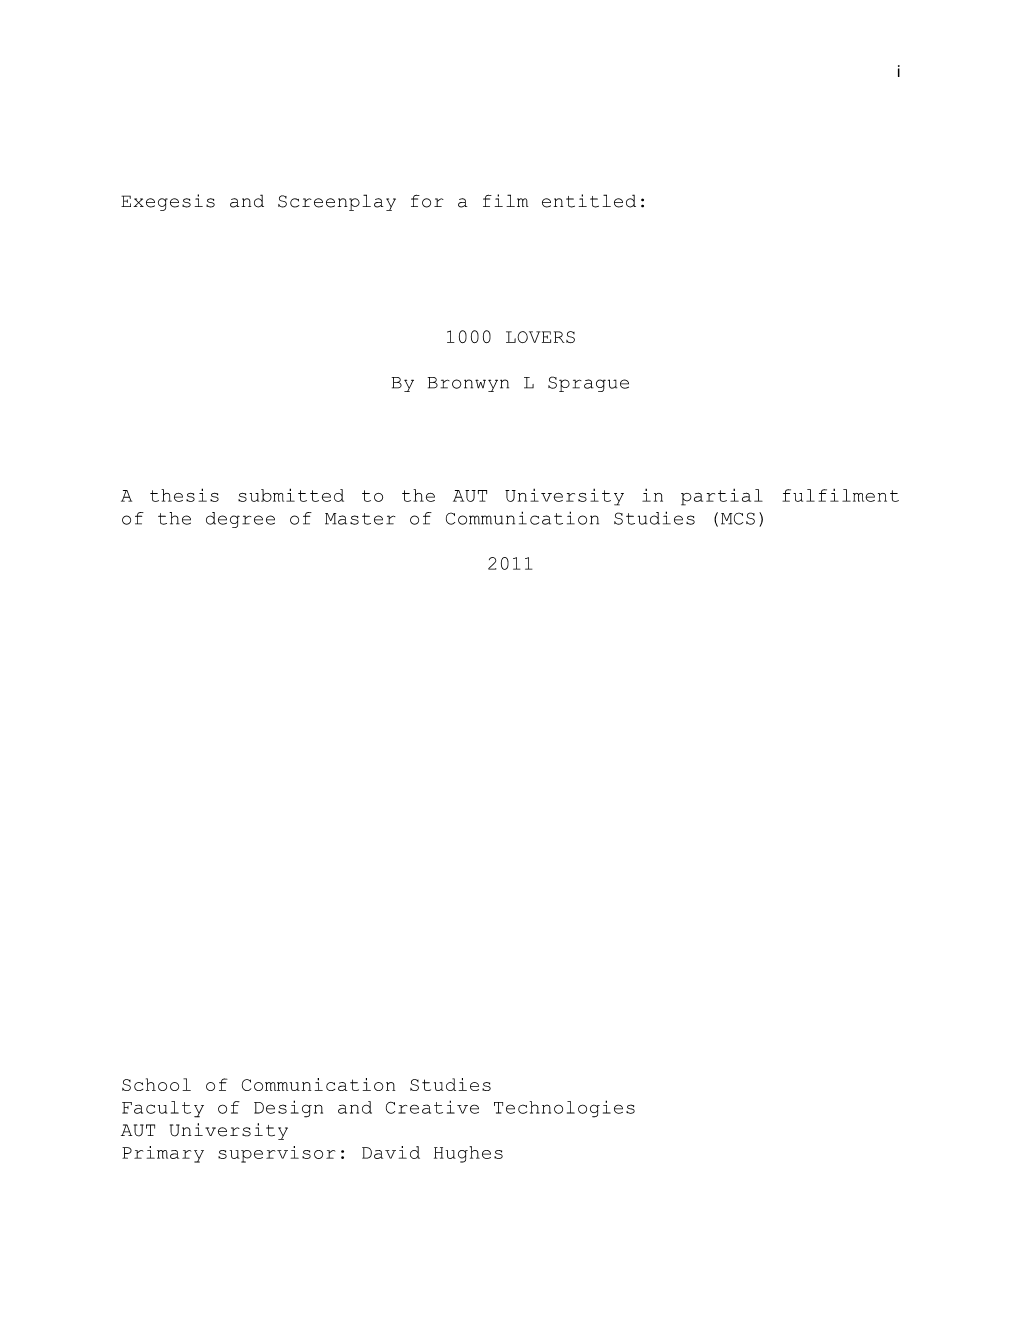 Exegesis and Screenplay for a Film Entitled: 1000 LOVERS by Bronwyn L Sprague a Thesis Submitted to the AUT University in Partia